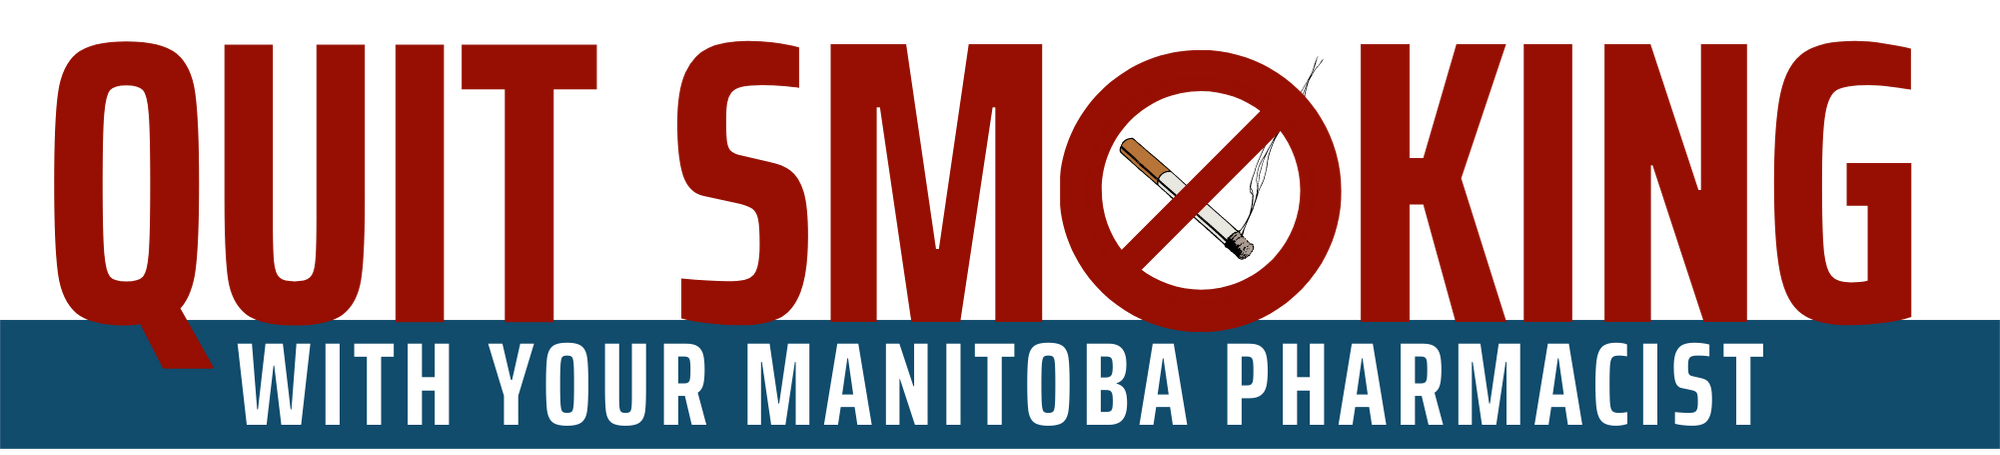 QUIT SMOKING WITH YOUR MANITOBA PHARMACIST